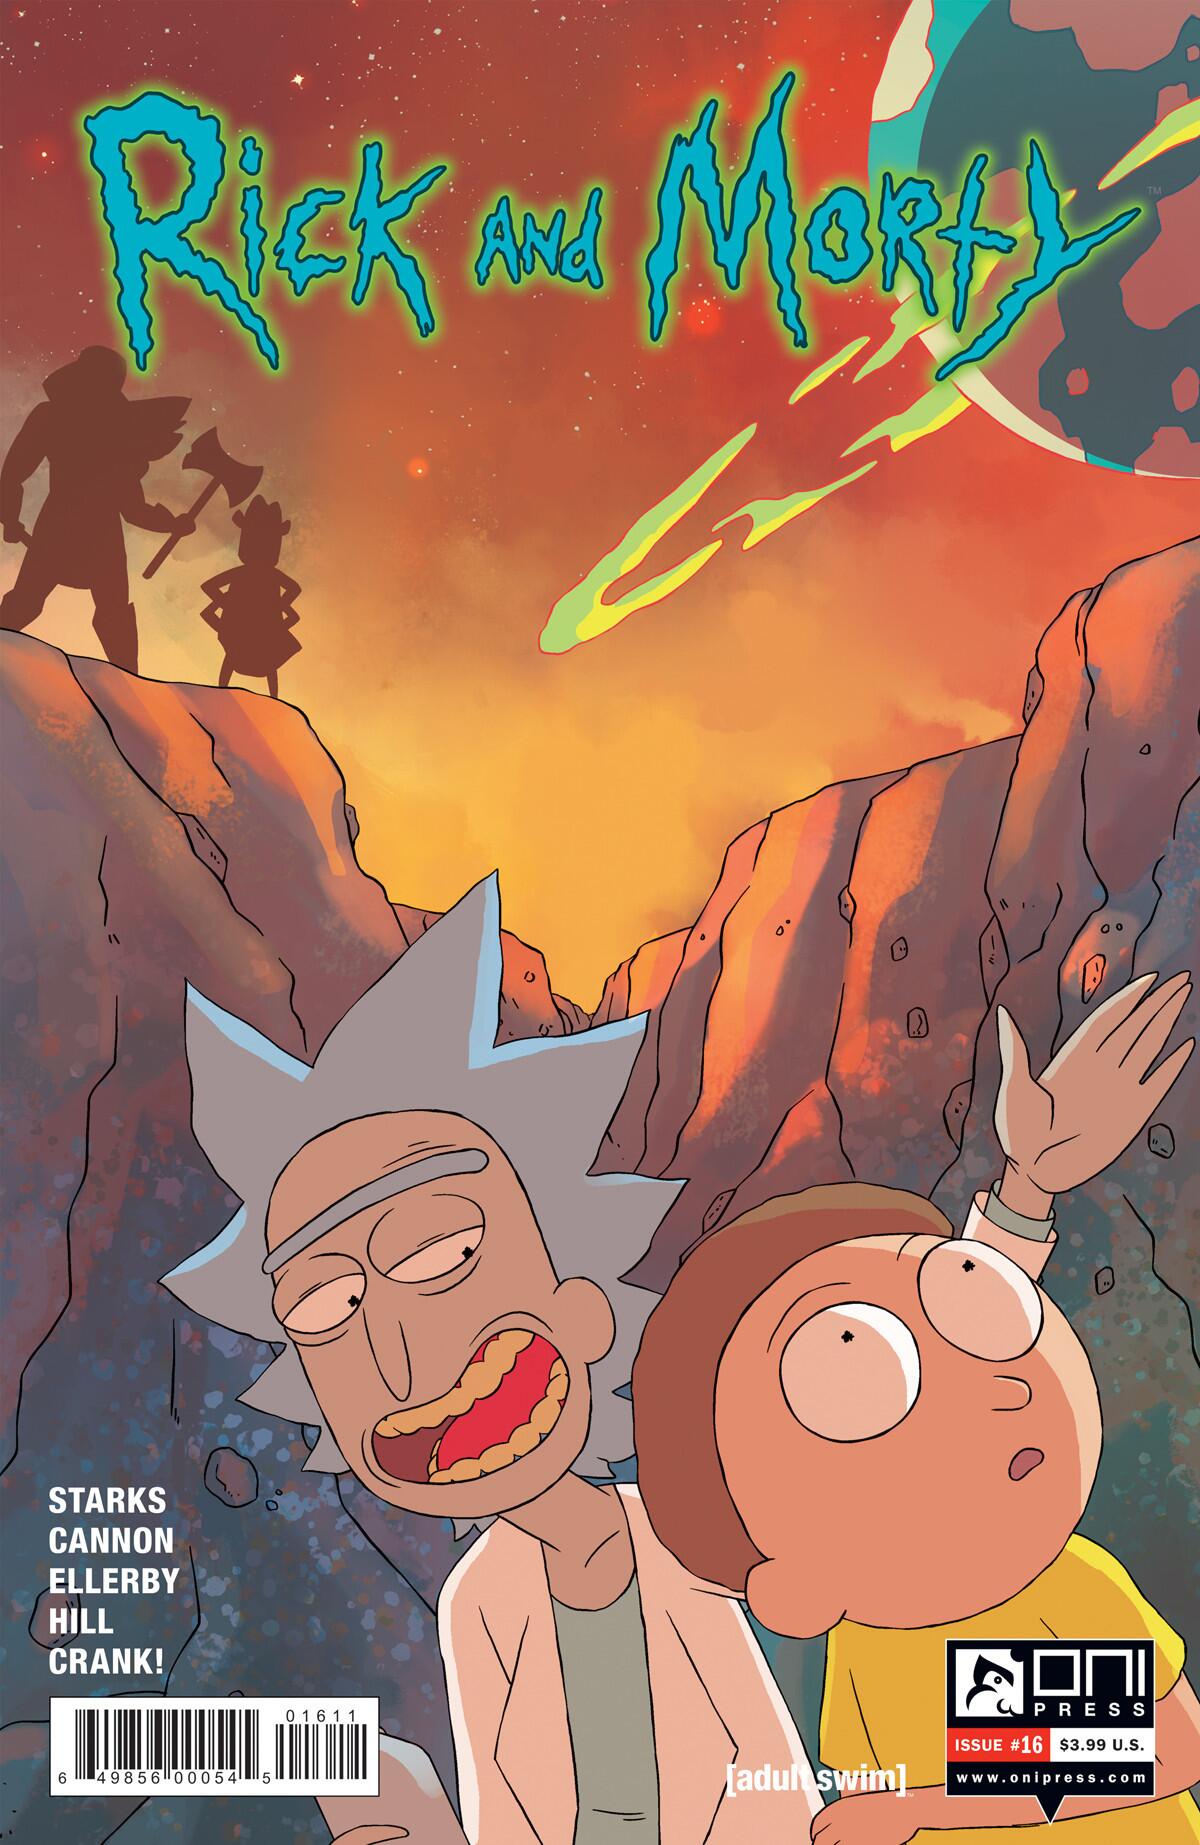 The cover for "Rick and Morty" No. 16 by CJ Cannon and Ryan Hill.